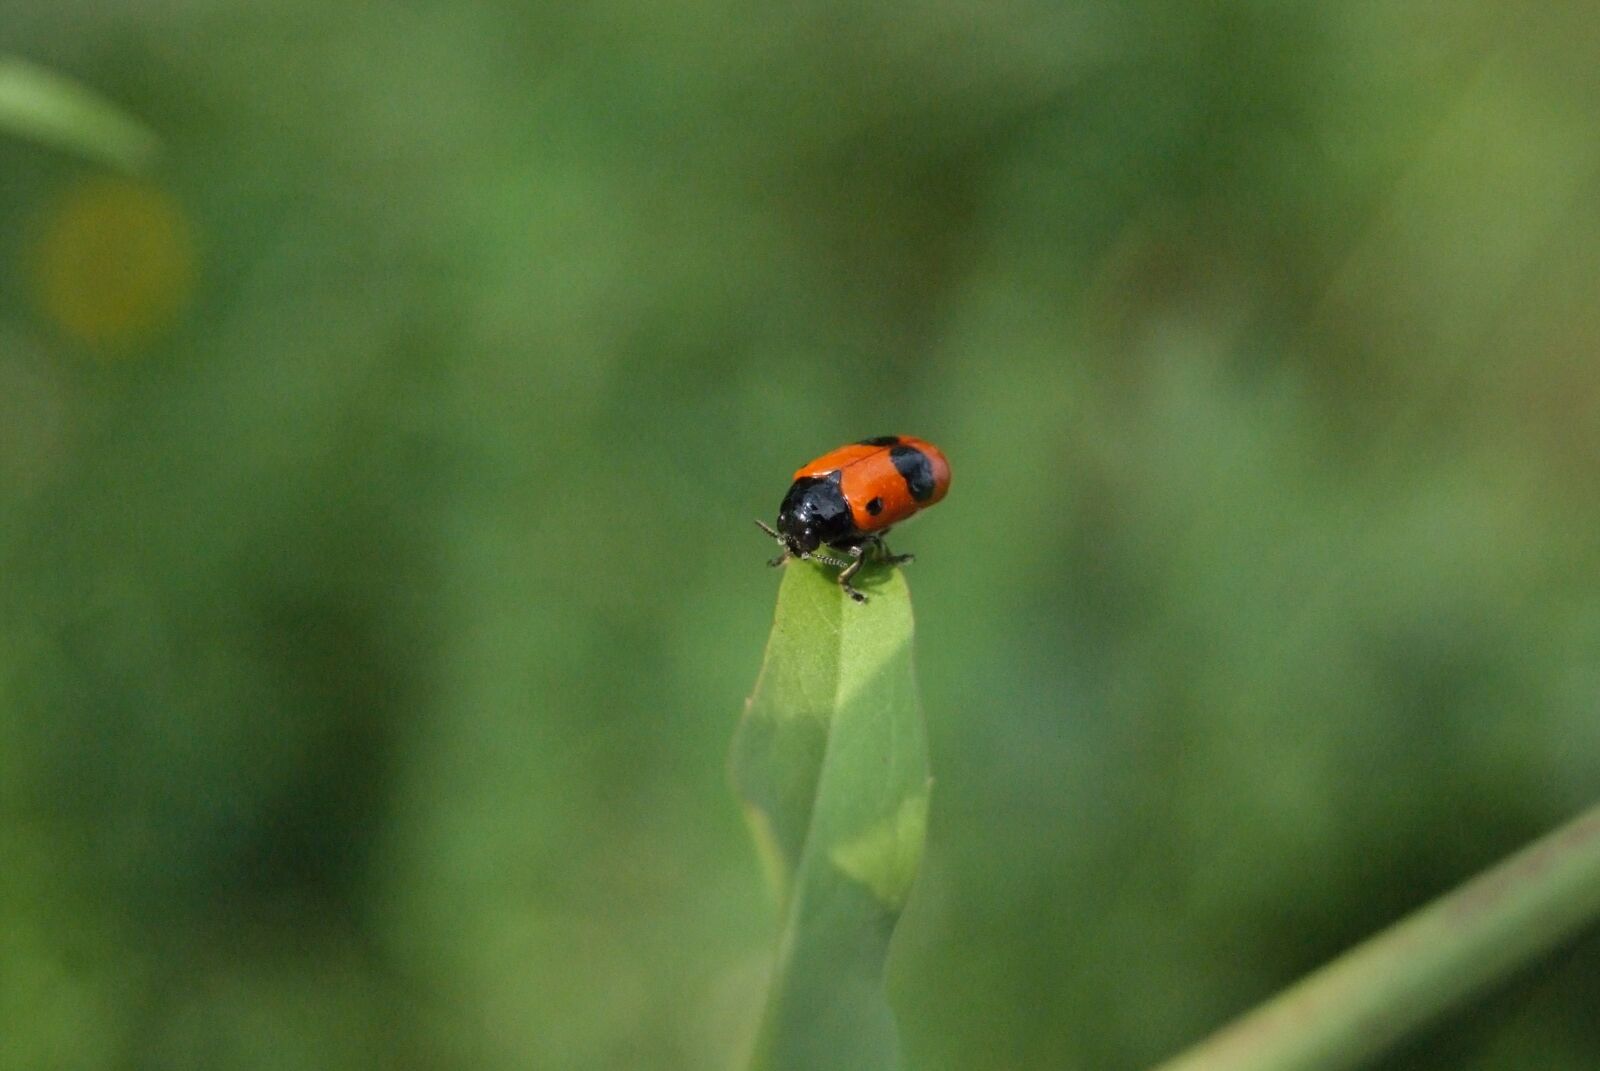 Fujifilm FinePix S5 Pro sample photo. Ants-blind beetles, insect, plant photography